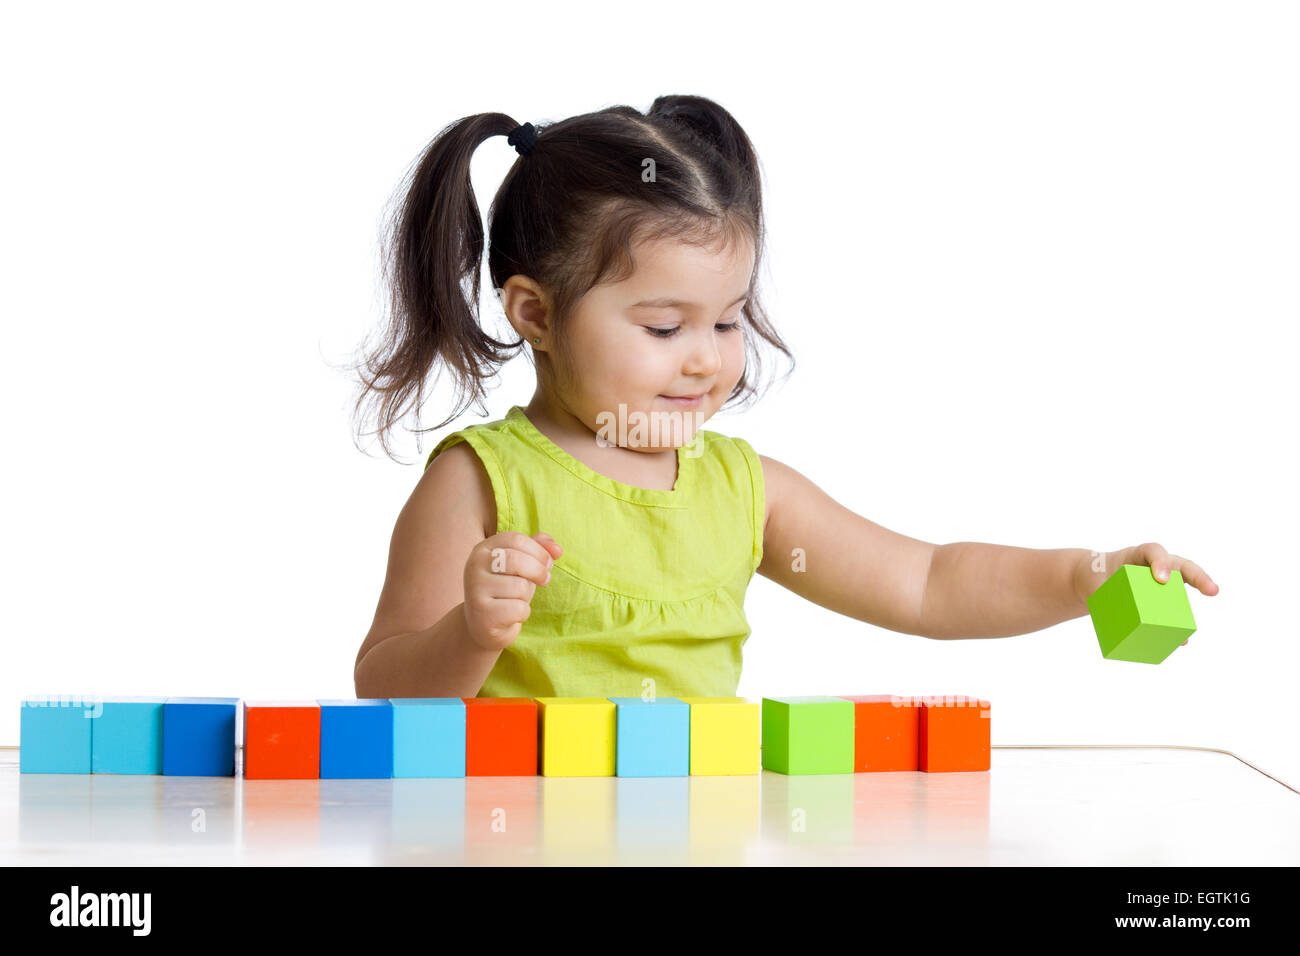 child plays with building blocks and learning of colors Stock Photo